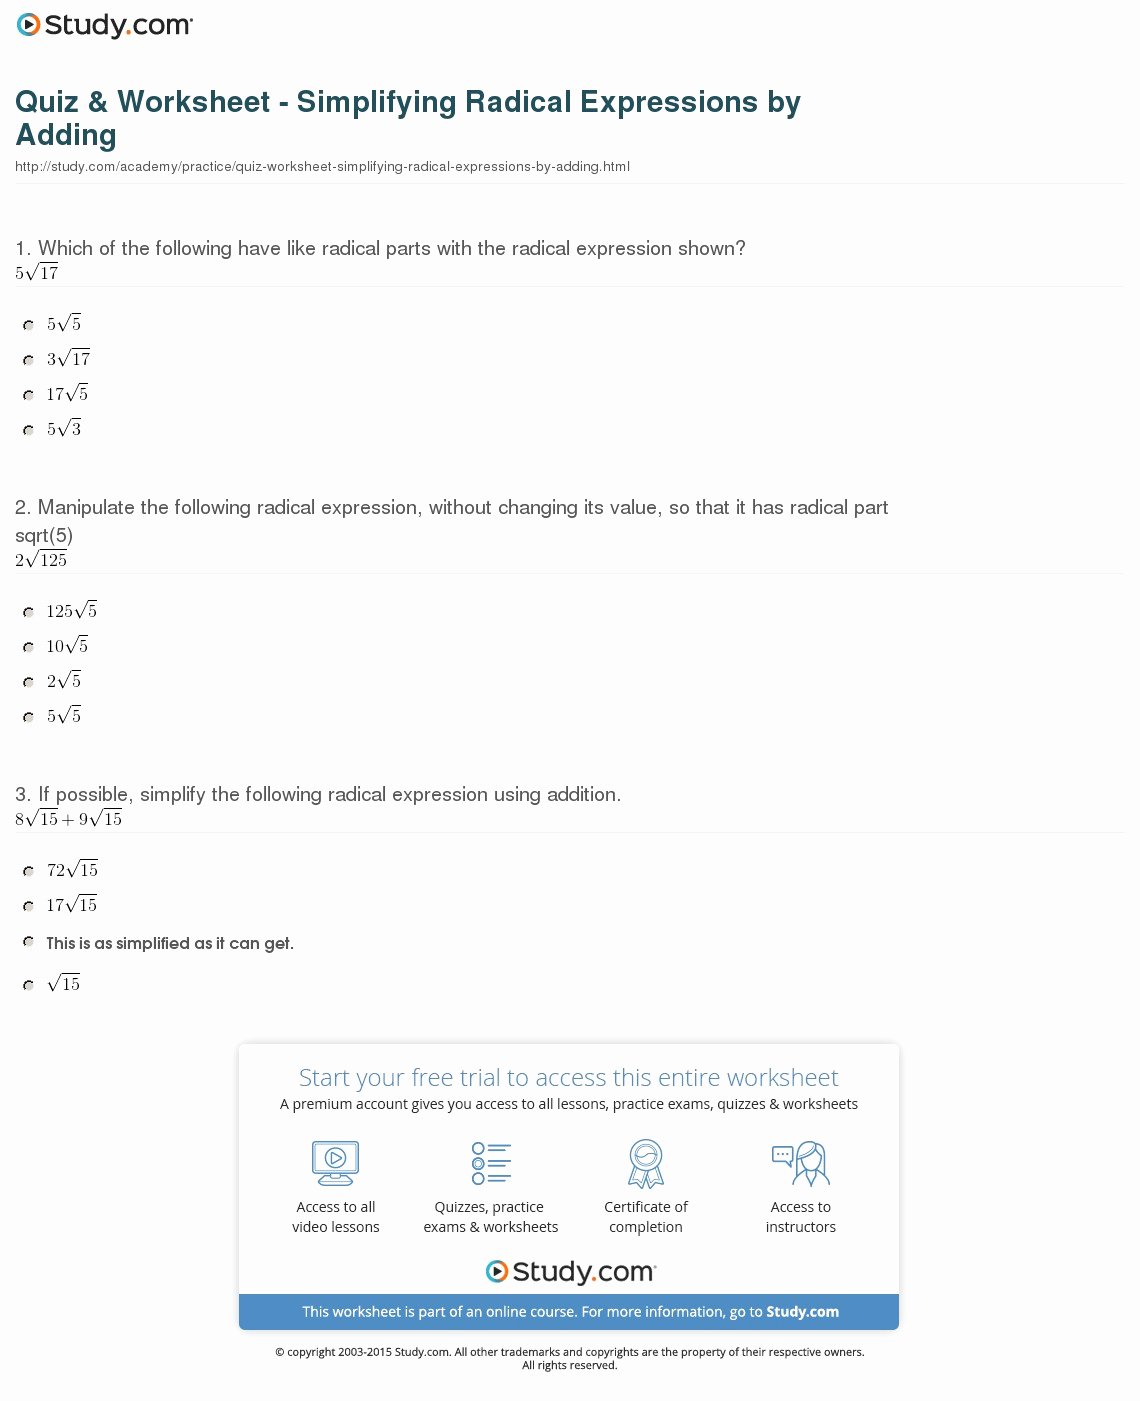 Simplifying Radical Expressions Worksheet Answers New Quiz &amp; Worksheet Simplifying Radical Expressions by